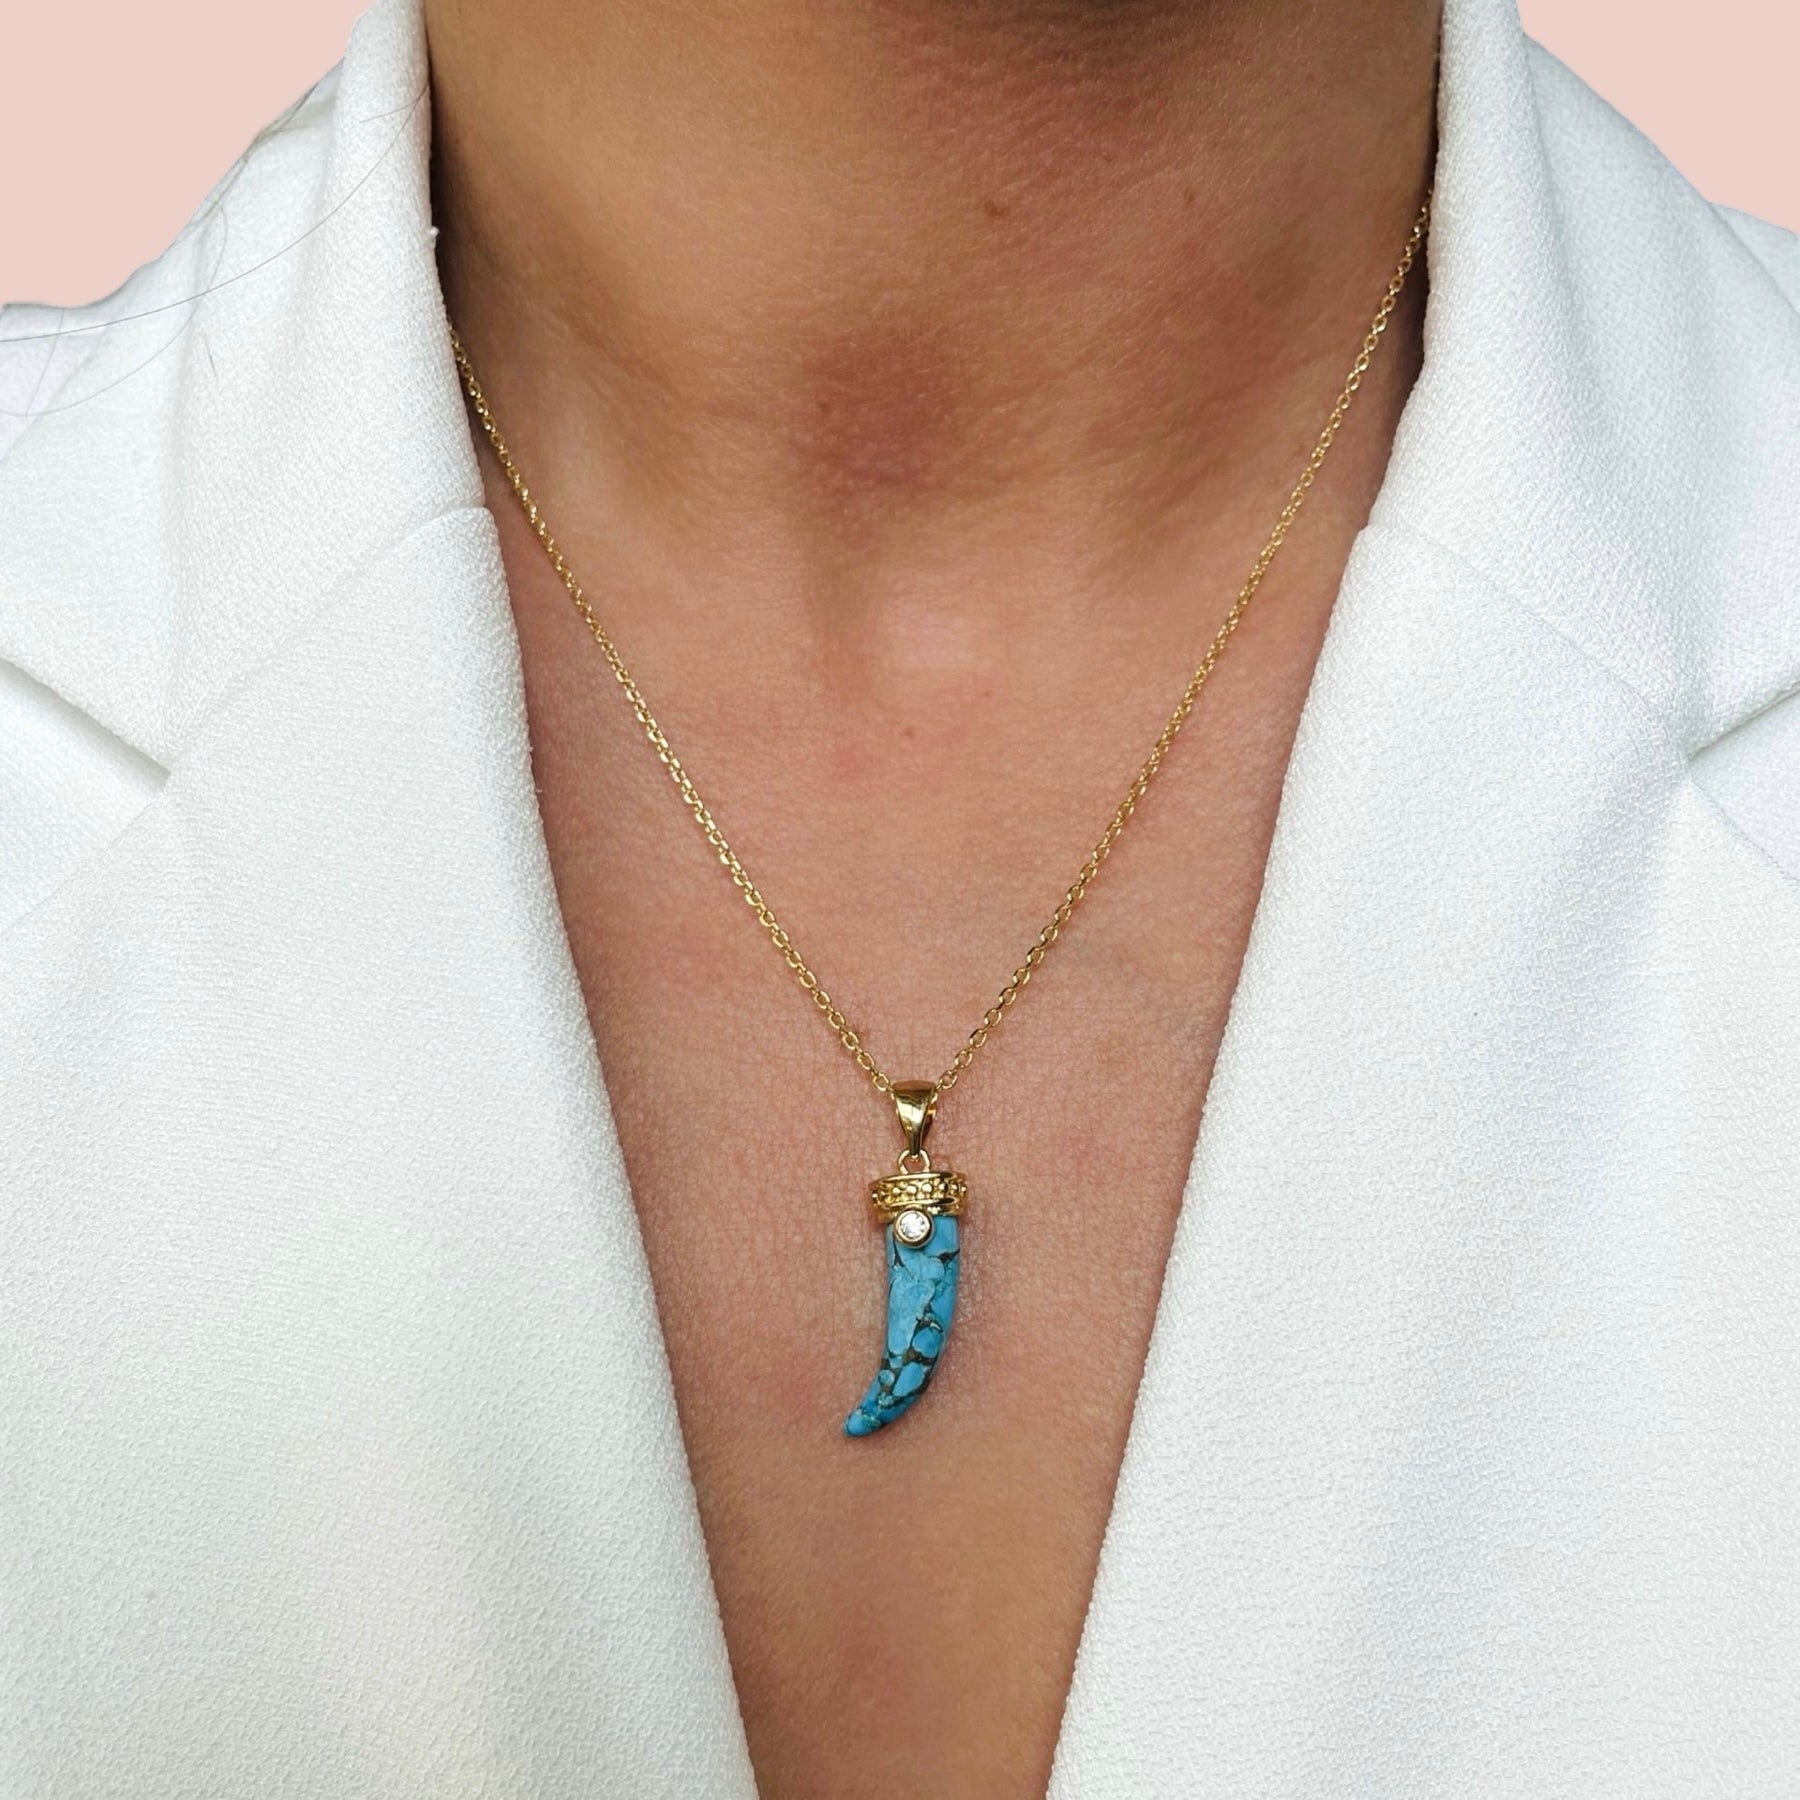 Gold-plated “turquoise horn” necklace